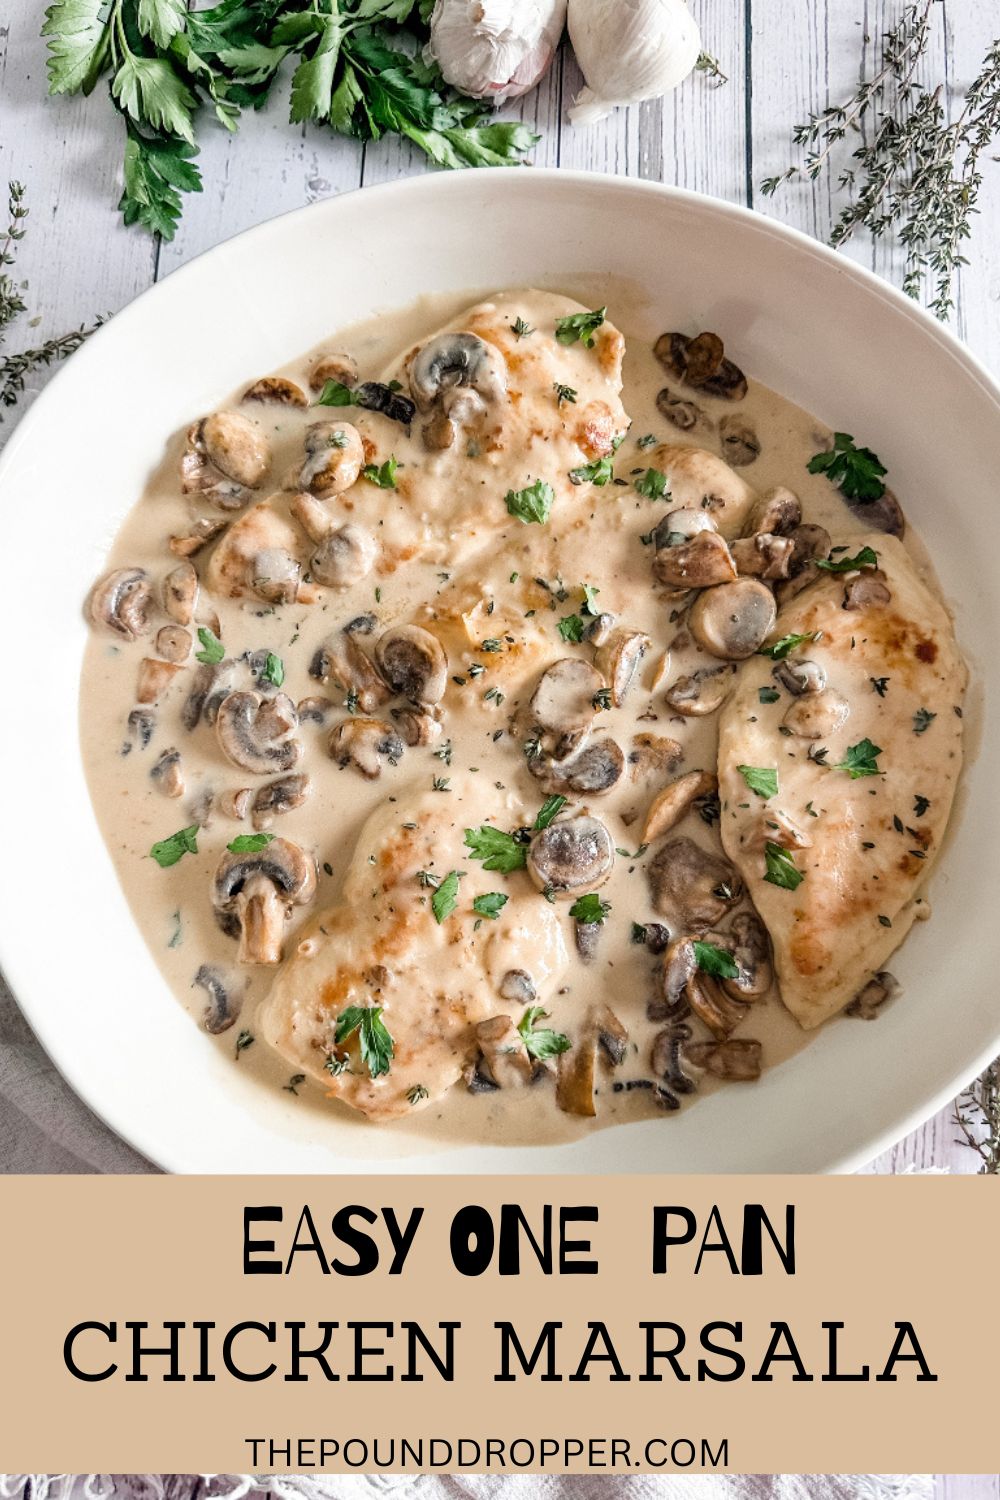 This Easy One Pan Chicken Marsala is lighter version of Olive Garden's-the savory flavor of seasoned chicken breasts coated in a homemade marsala wine sauce and packed with fresh sliced mushrooms makes this dish irresistibly delicious! via @pounddropper